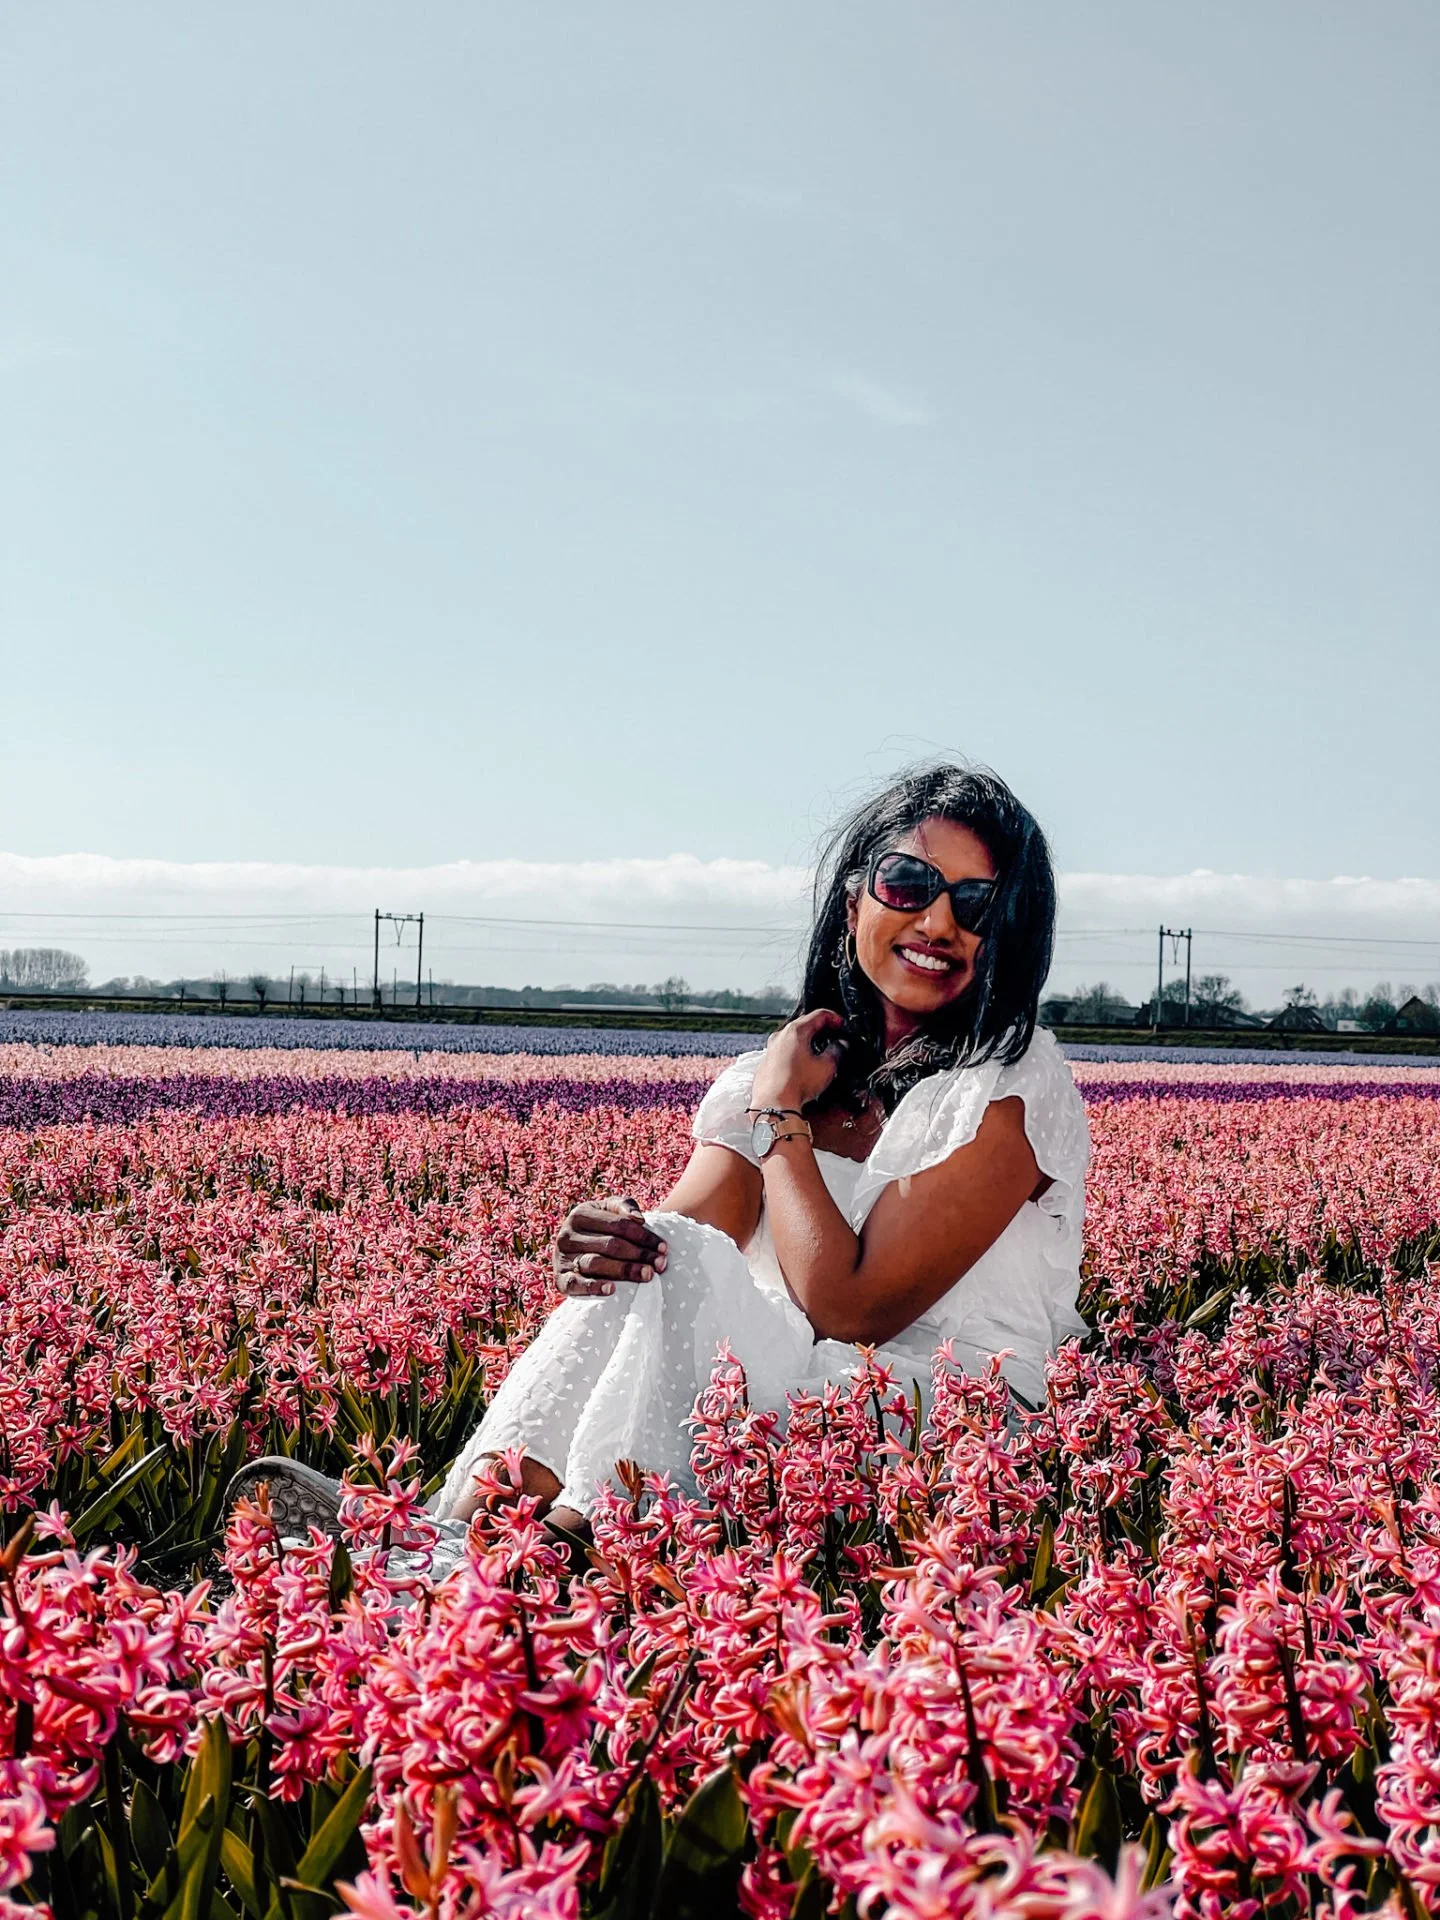 Kiki from RooKiExplorers posing in a field of pink hyacinths in the Netherlands.